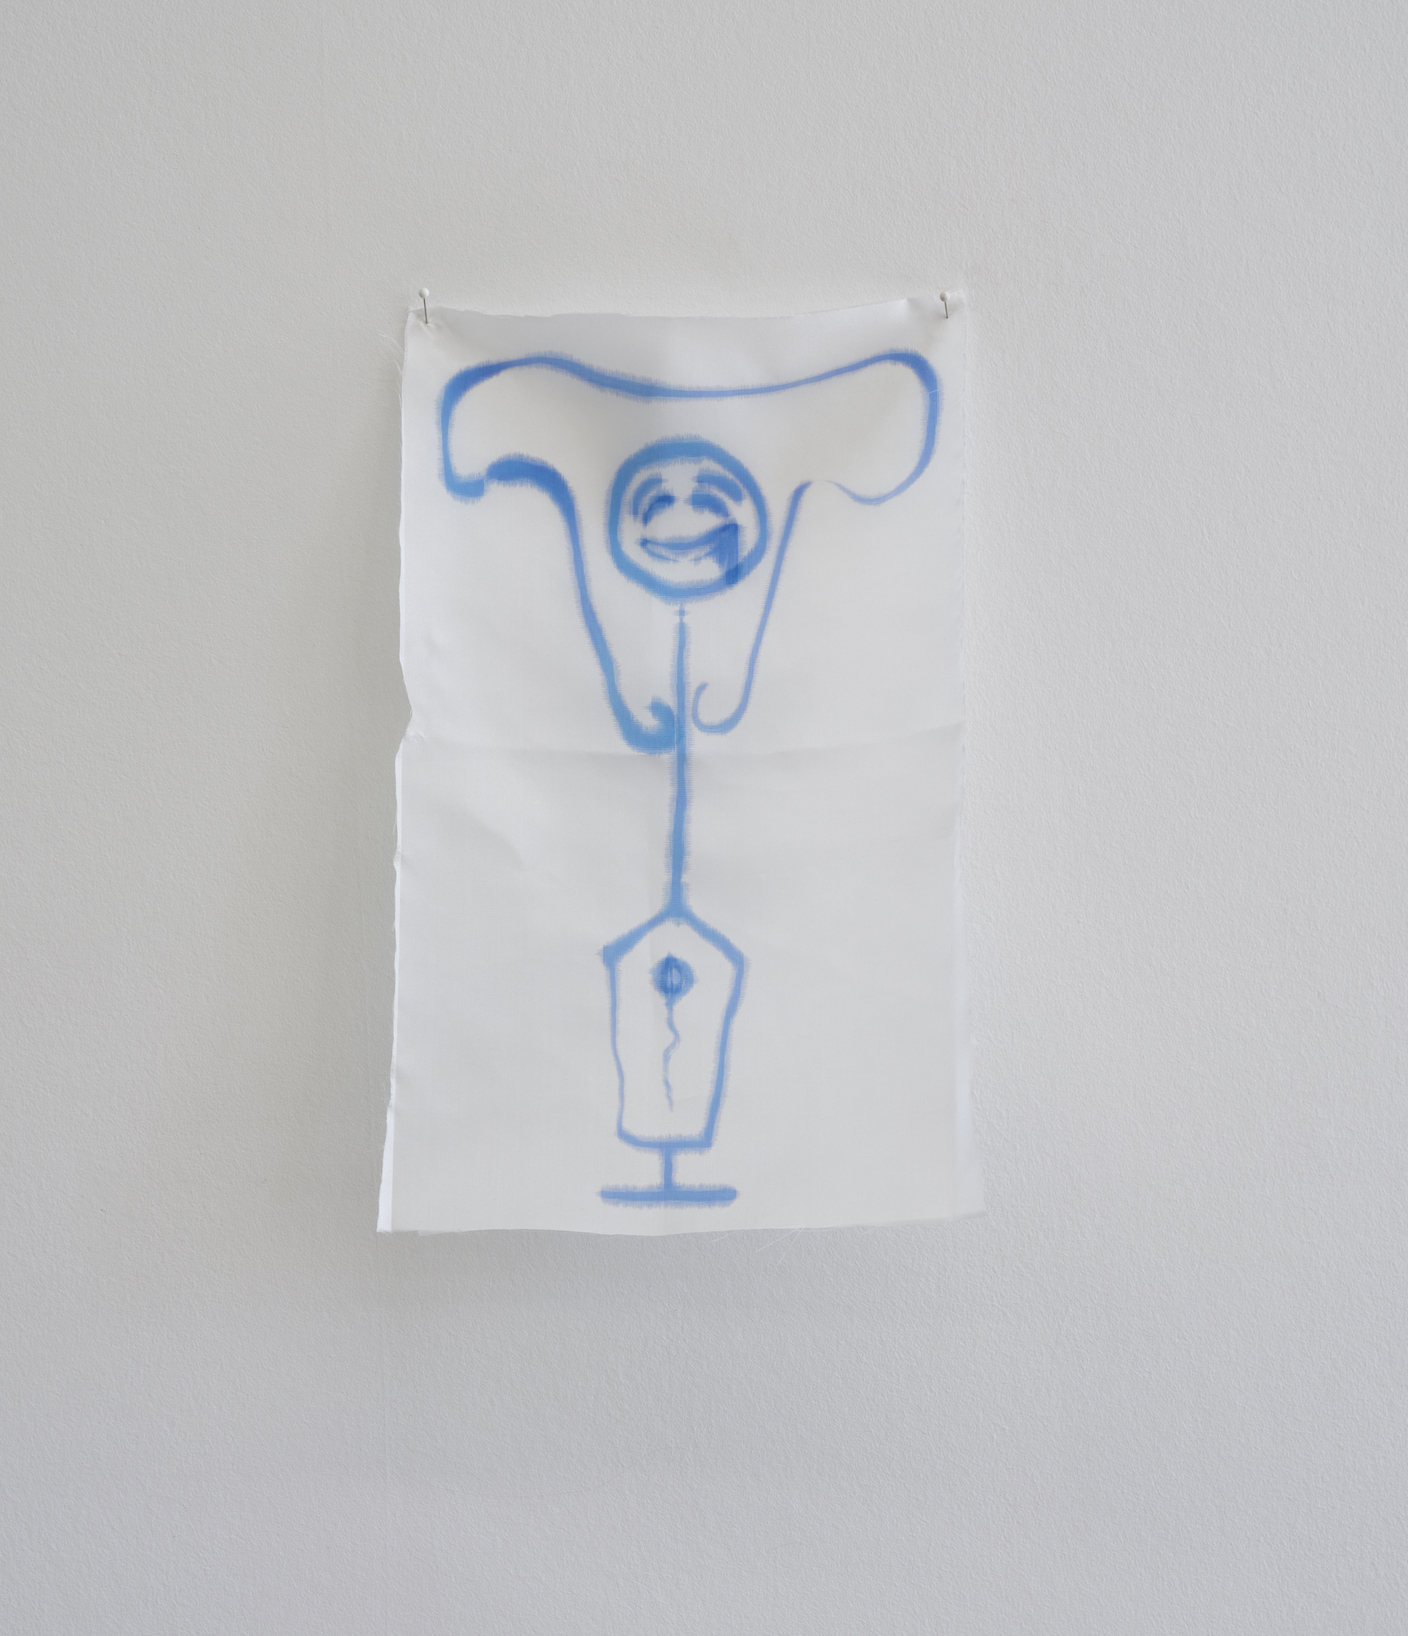 Sidsel Meineche Hansen: Methyline blue diluted by female ejaculation on silk fabric, 2021.